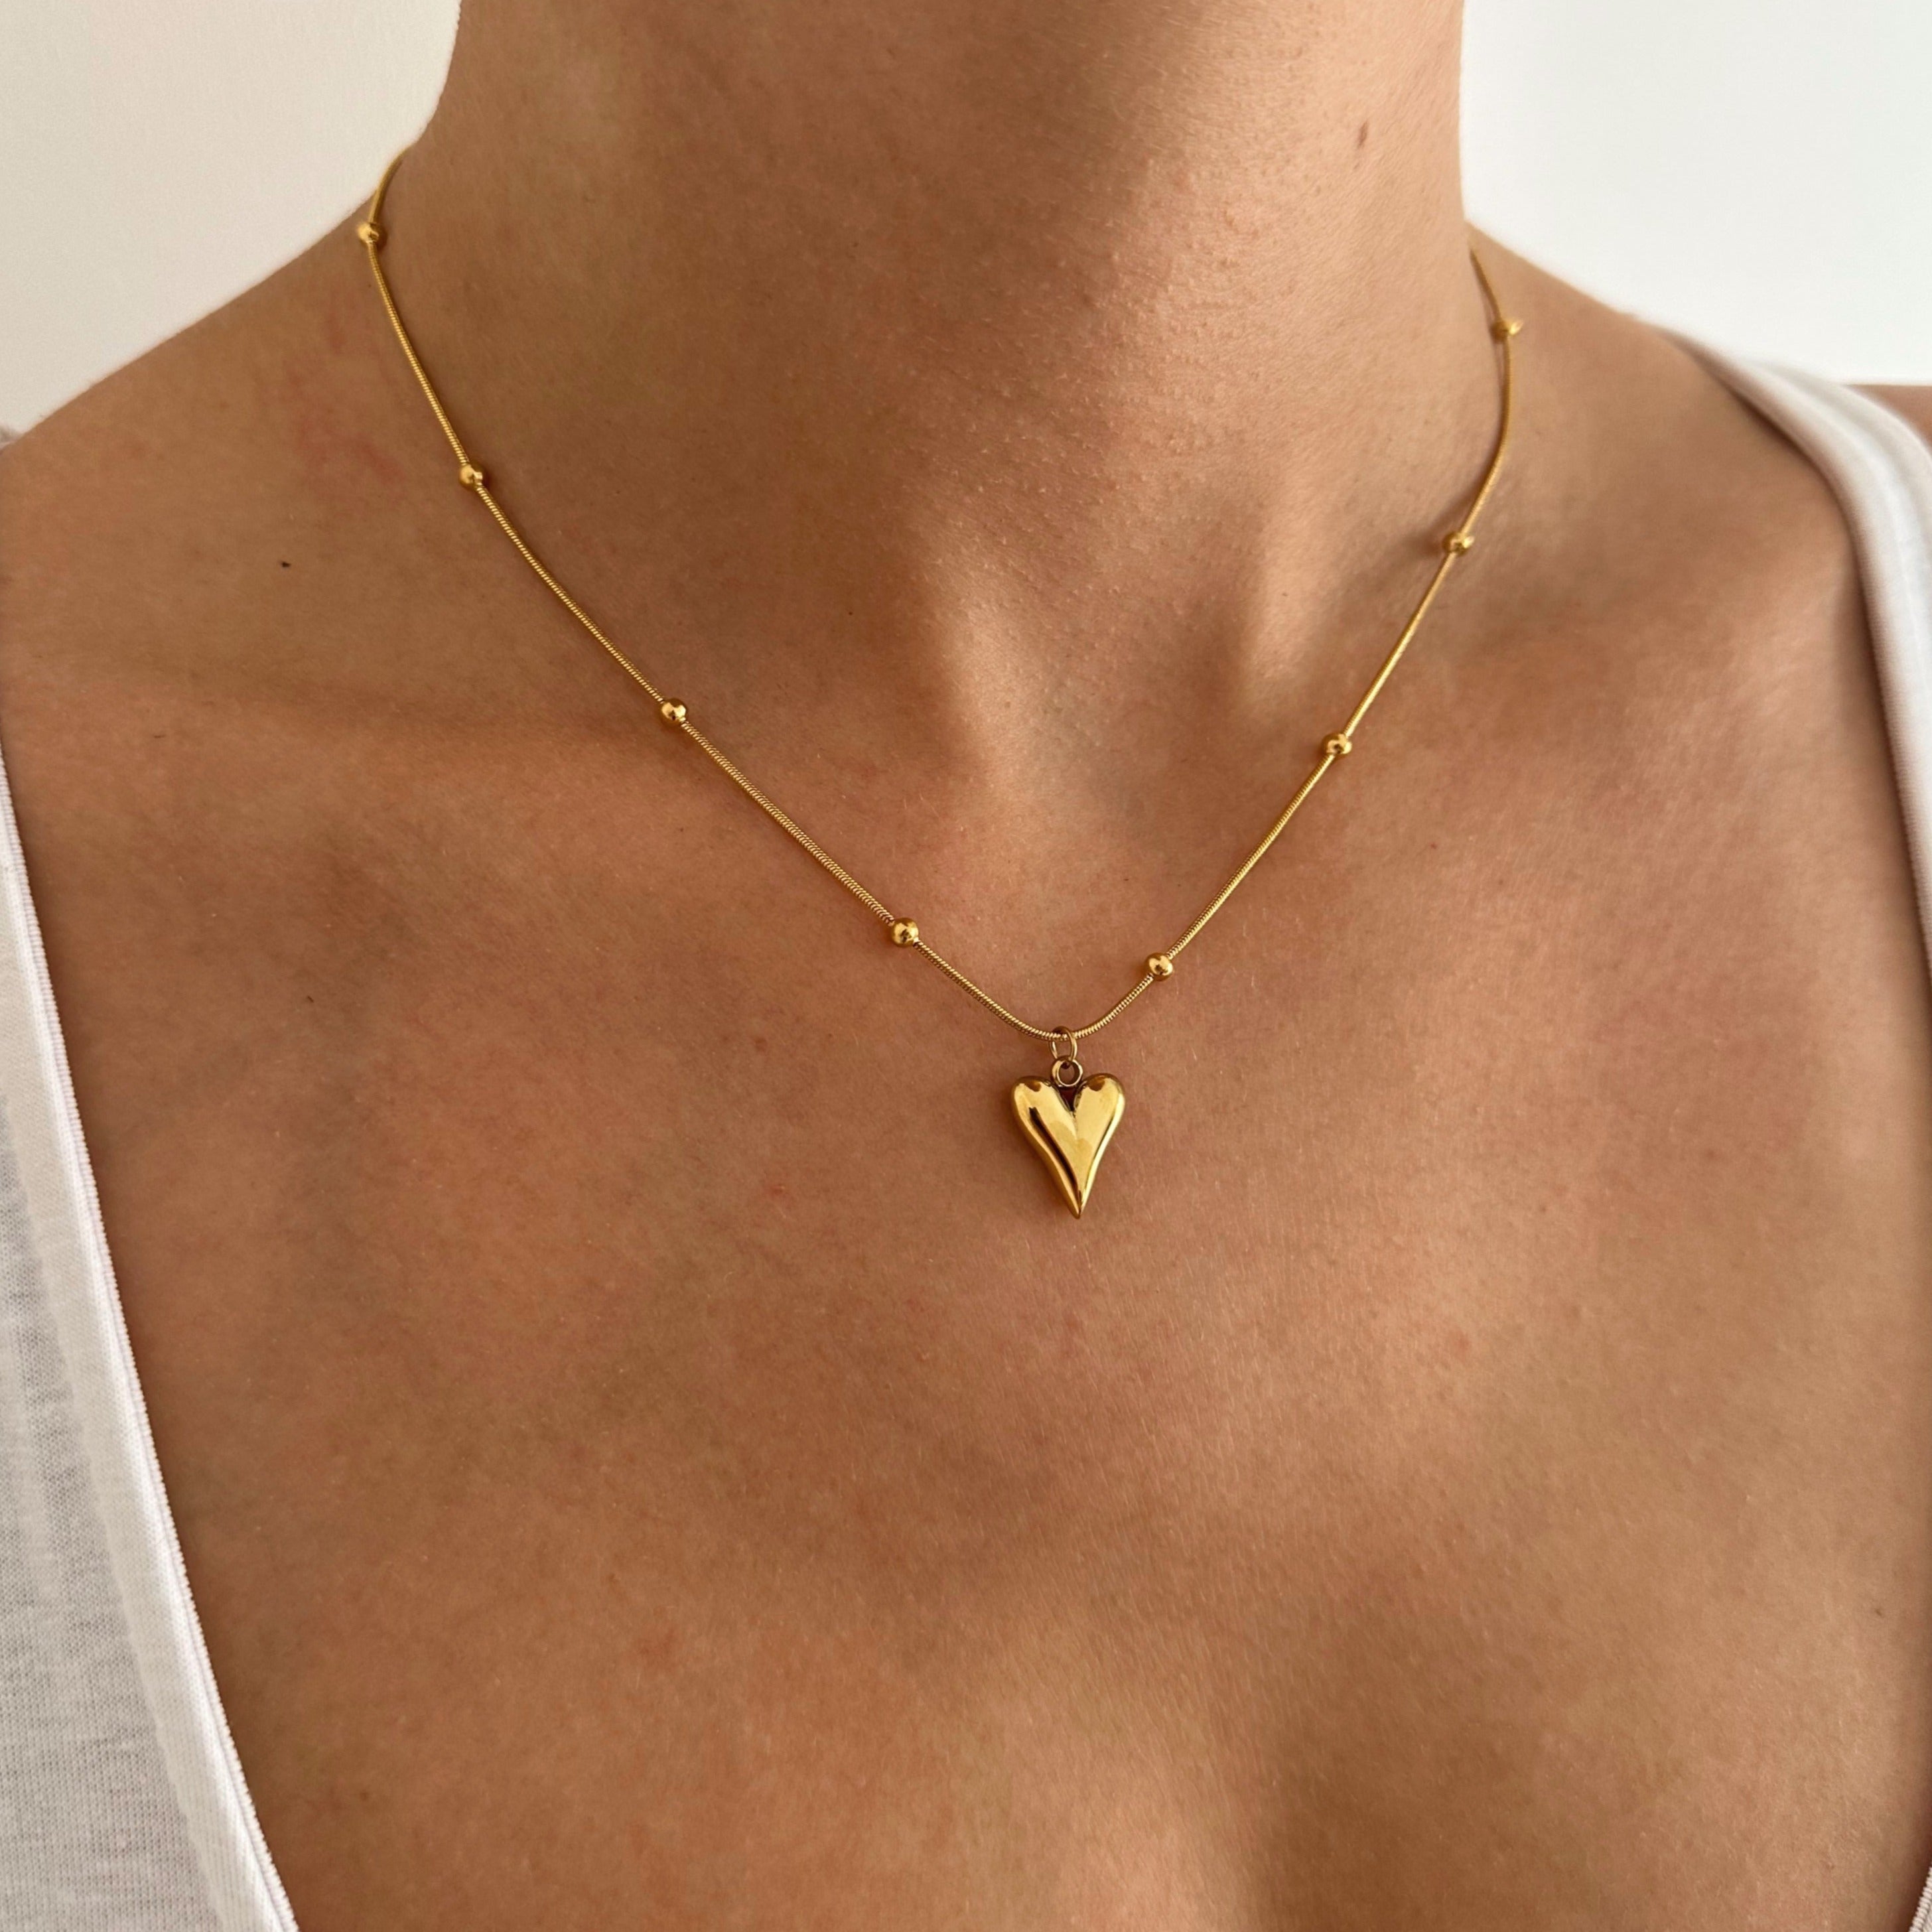 Gold Chain with Heart Statement Pendant